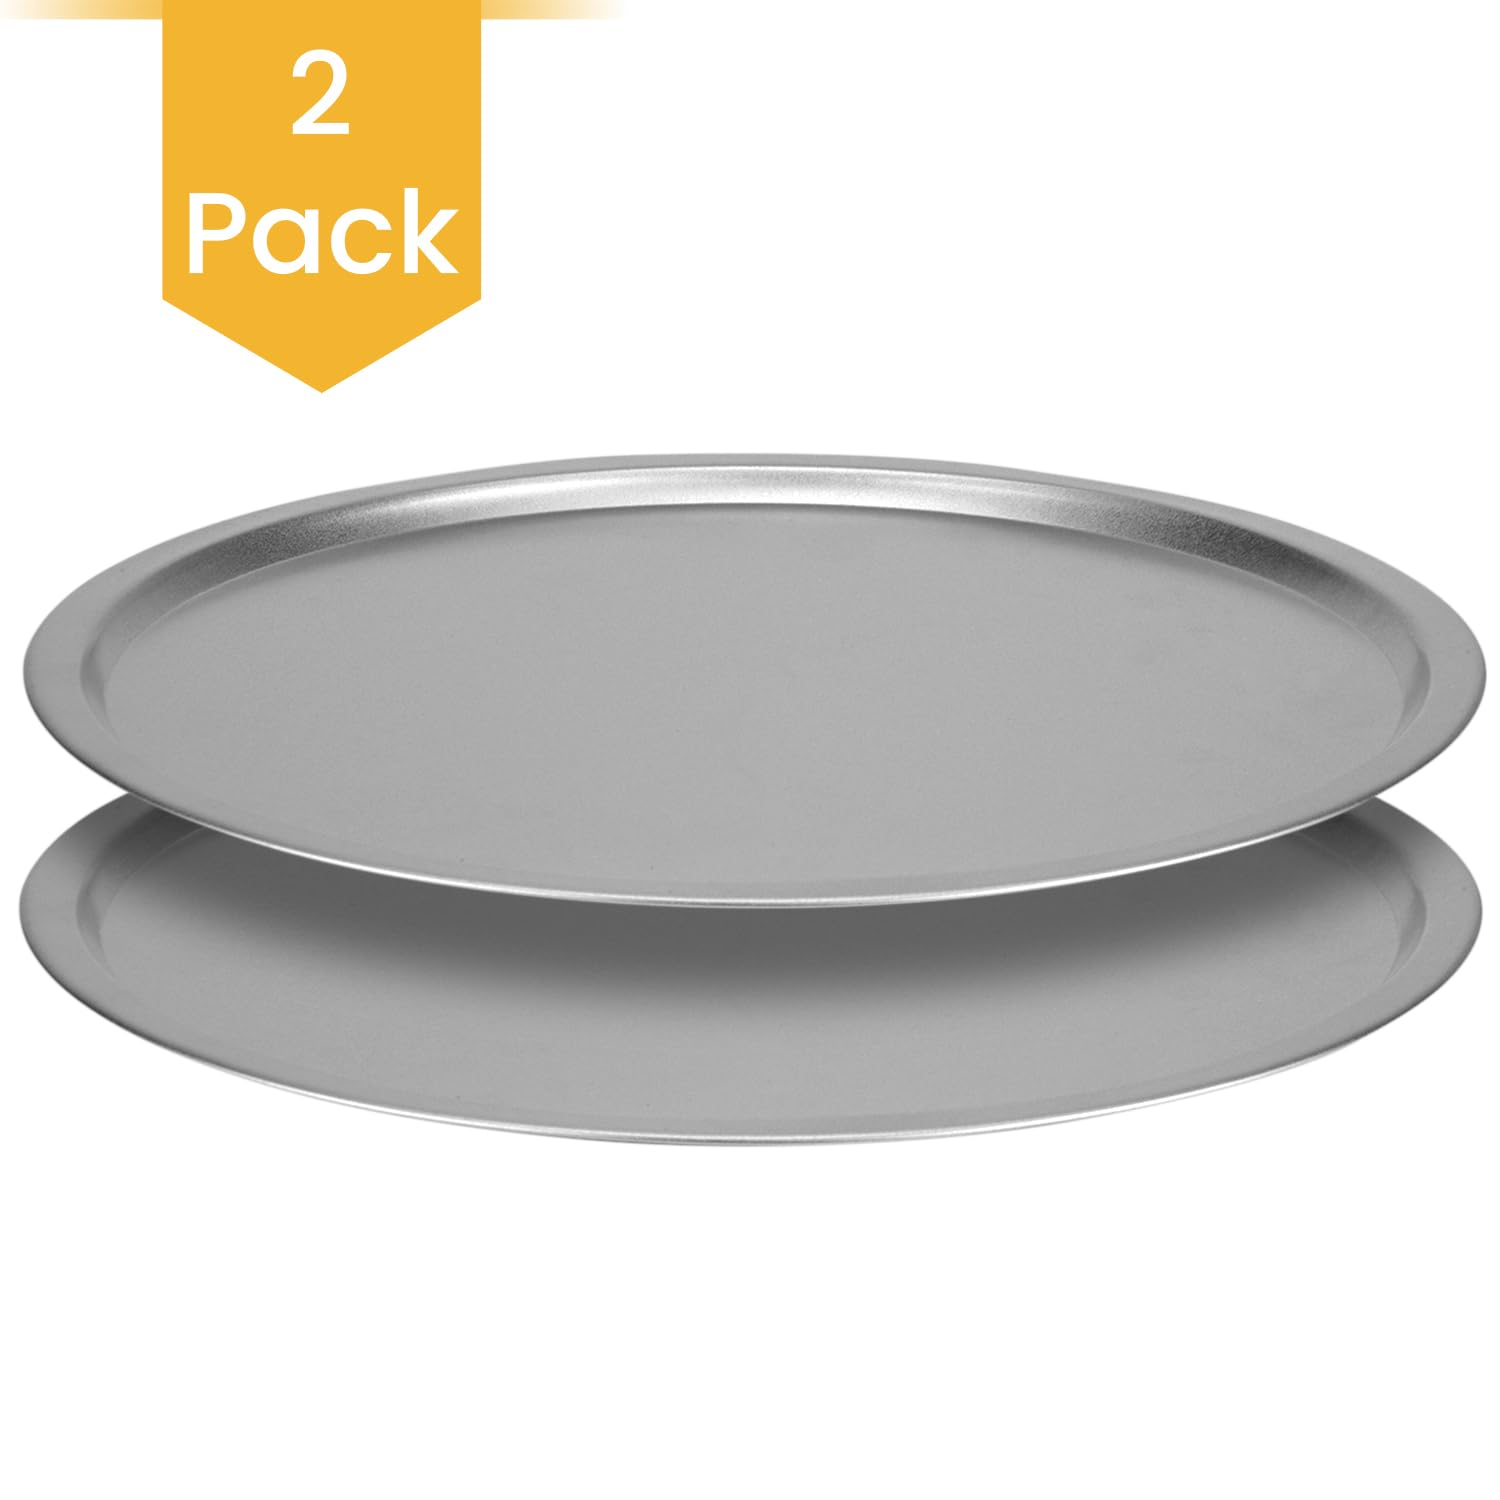 DecorRack 2 Pack 13 Inch Alloy Steel Pizza Pan, Non-Stick Coating, Dishwasher Safe Serving Tray, Round Baking Tray for Oven Use